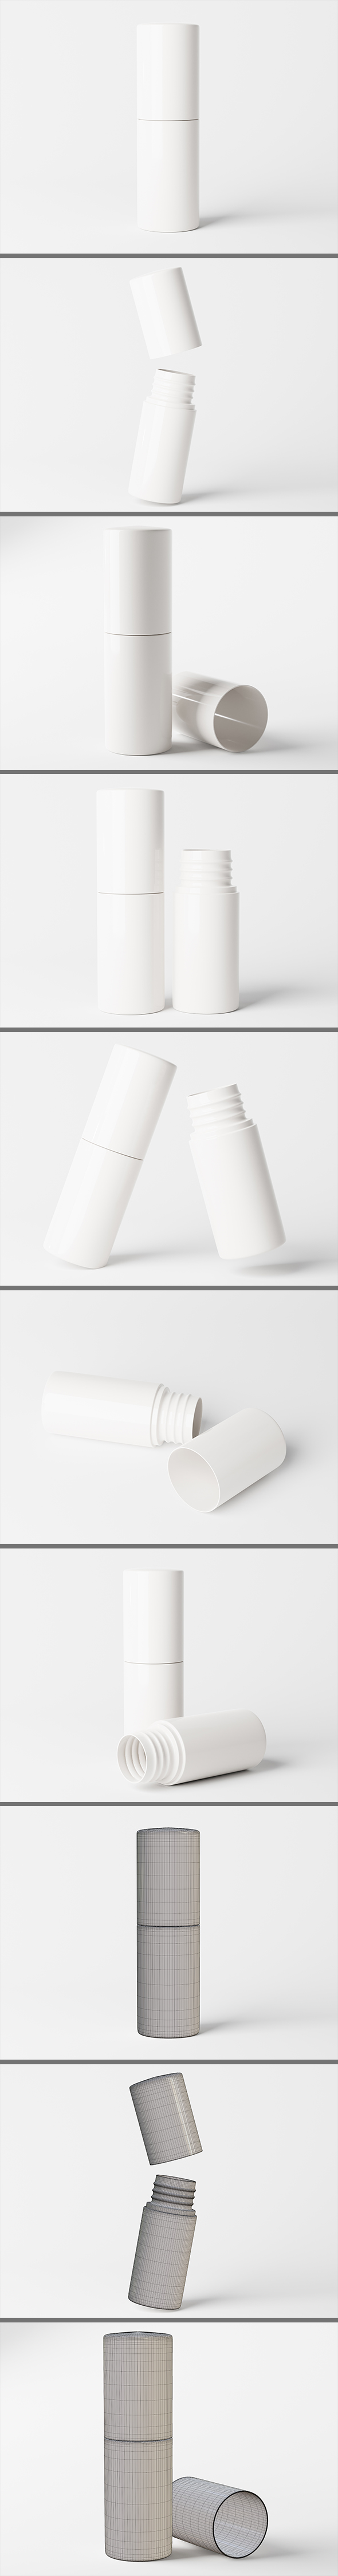 Cosmetic Product Bottle 3D Model